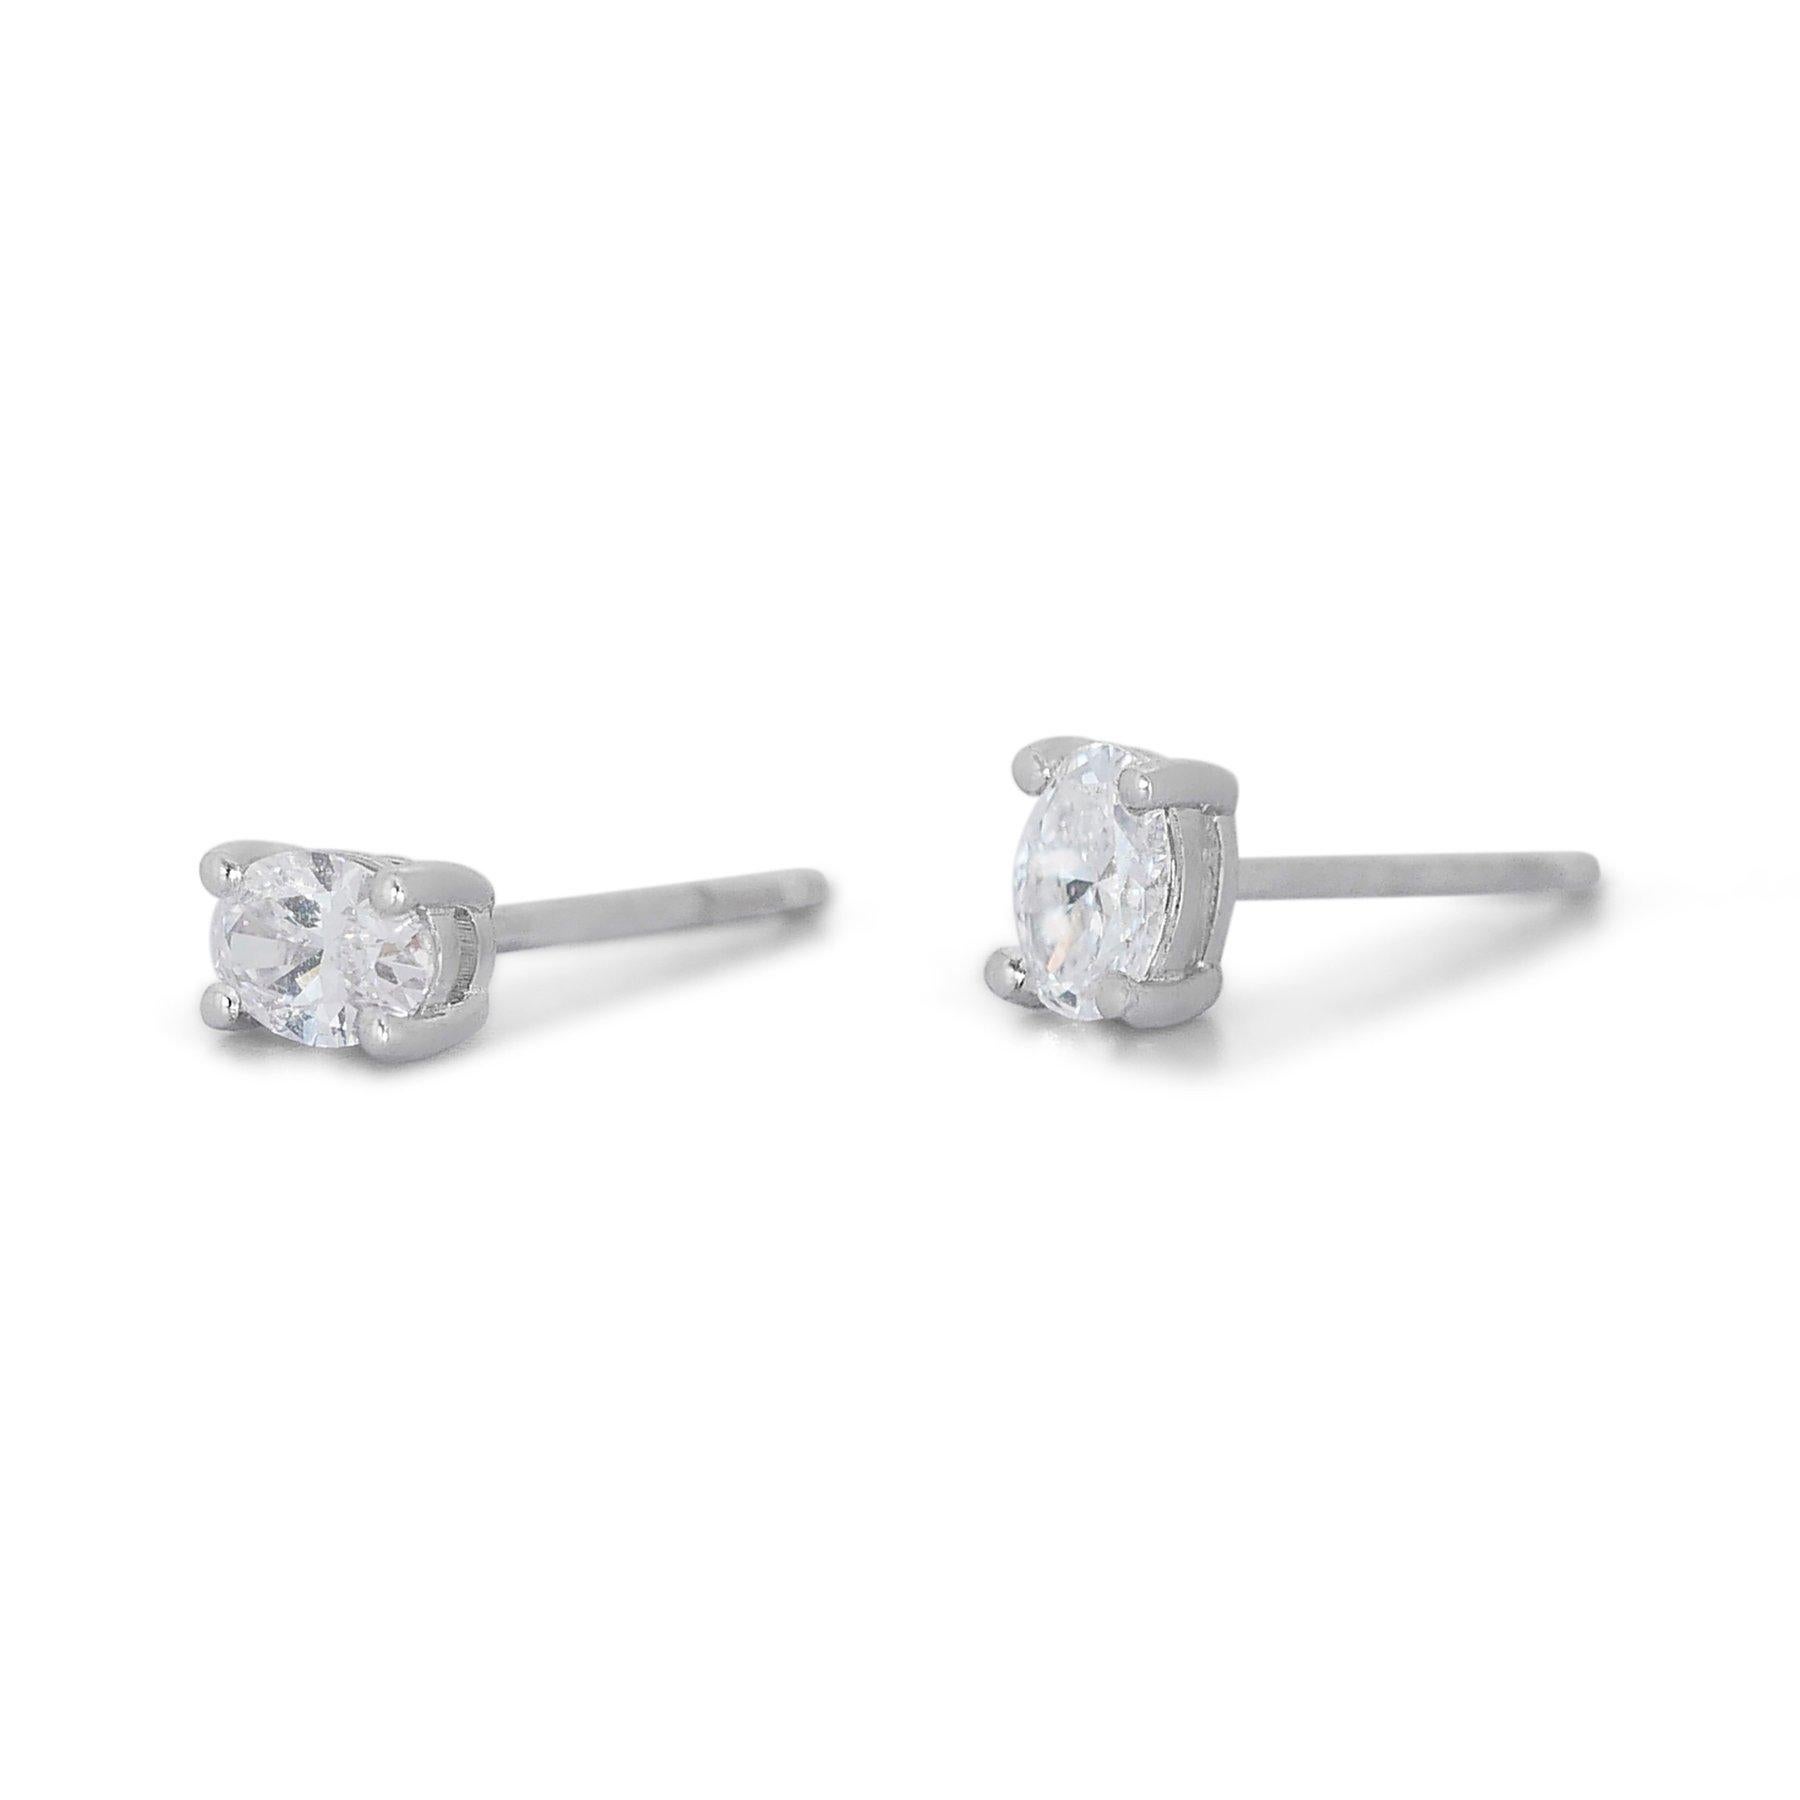 Oval Cut Sparkling 1.82ct Diamond Stud Earrings in 18k White Gold - GIA Certified  For Sale